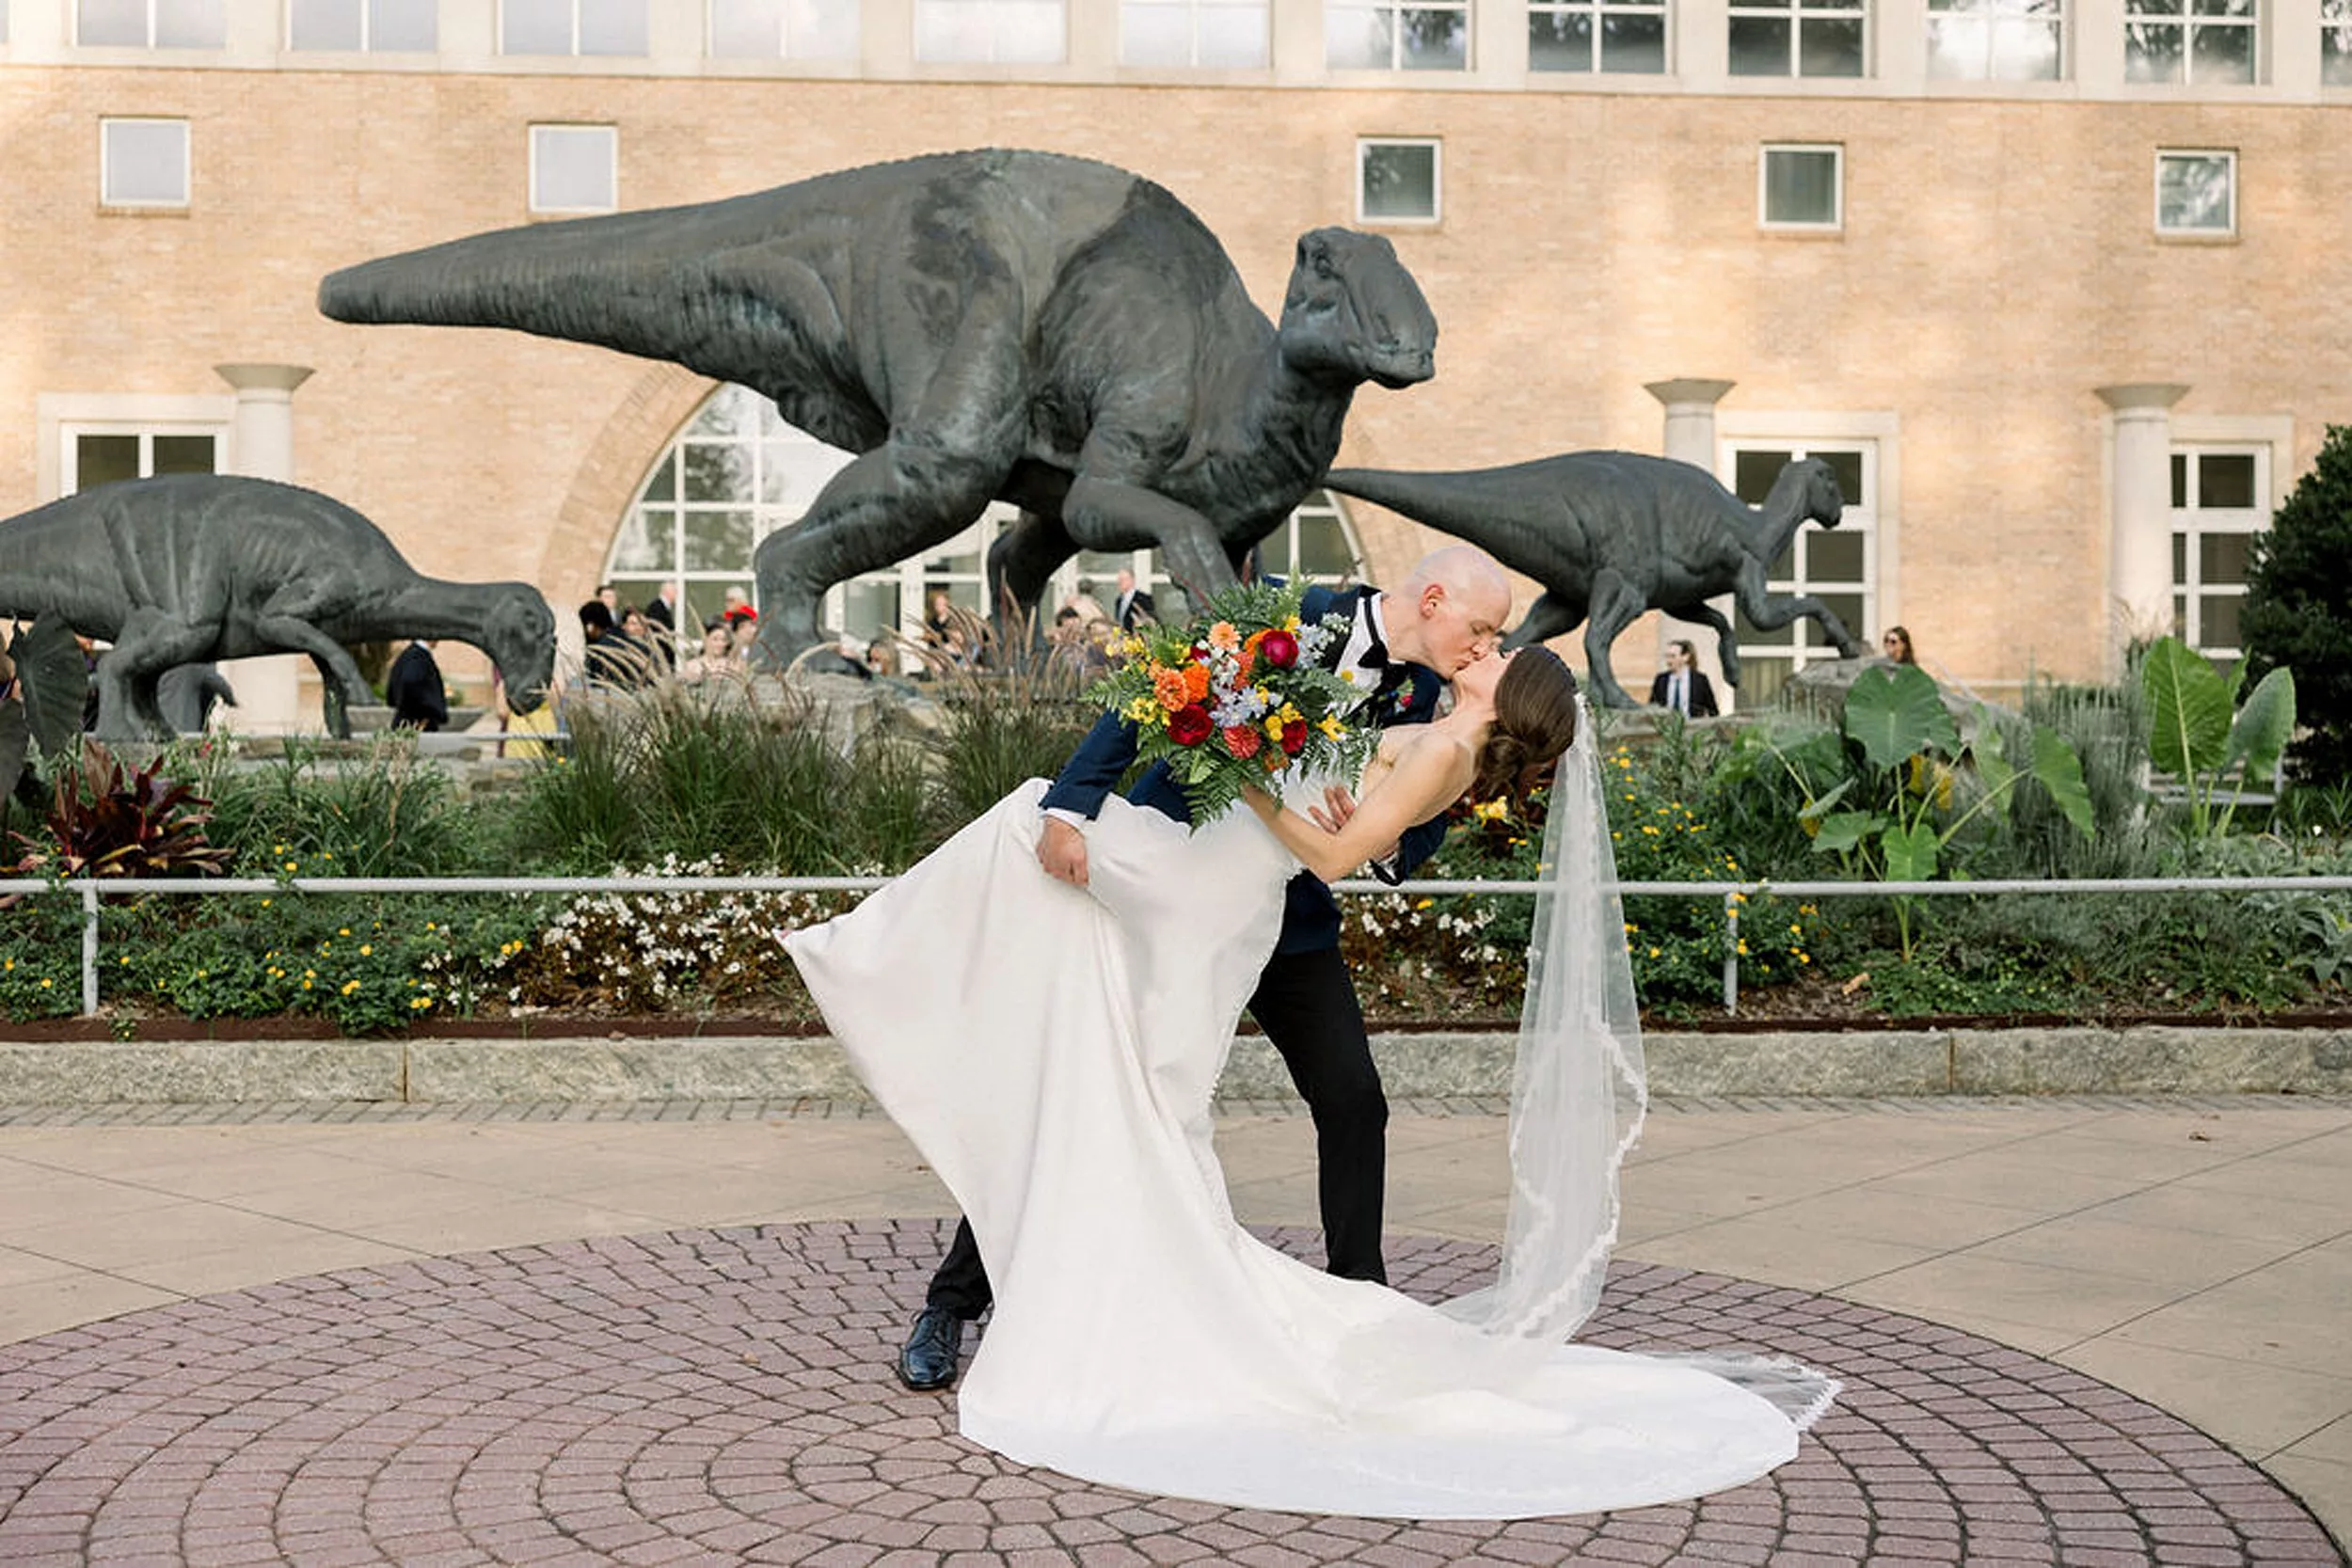 A groom dips and kisses his bride while standing in a dinosaur garden at their jurassic park wedding